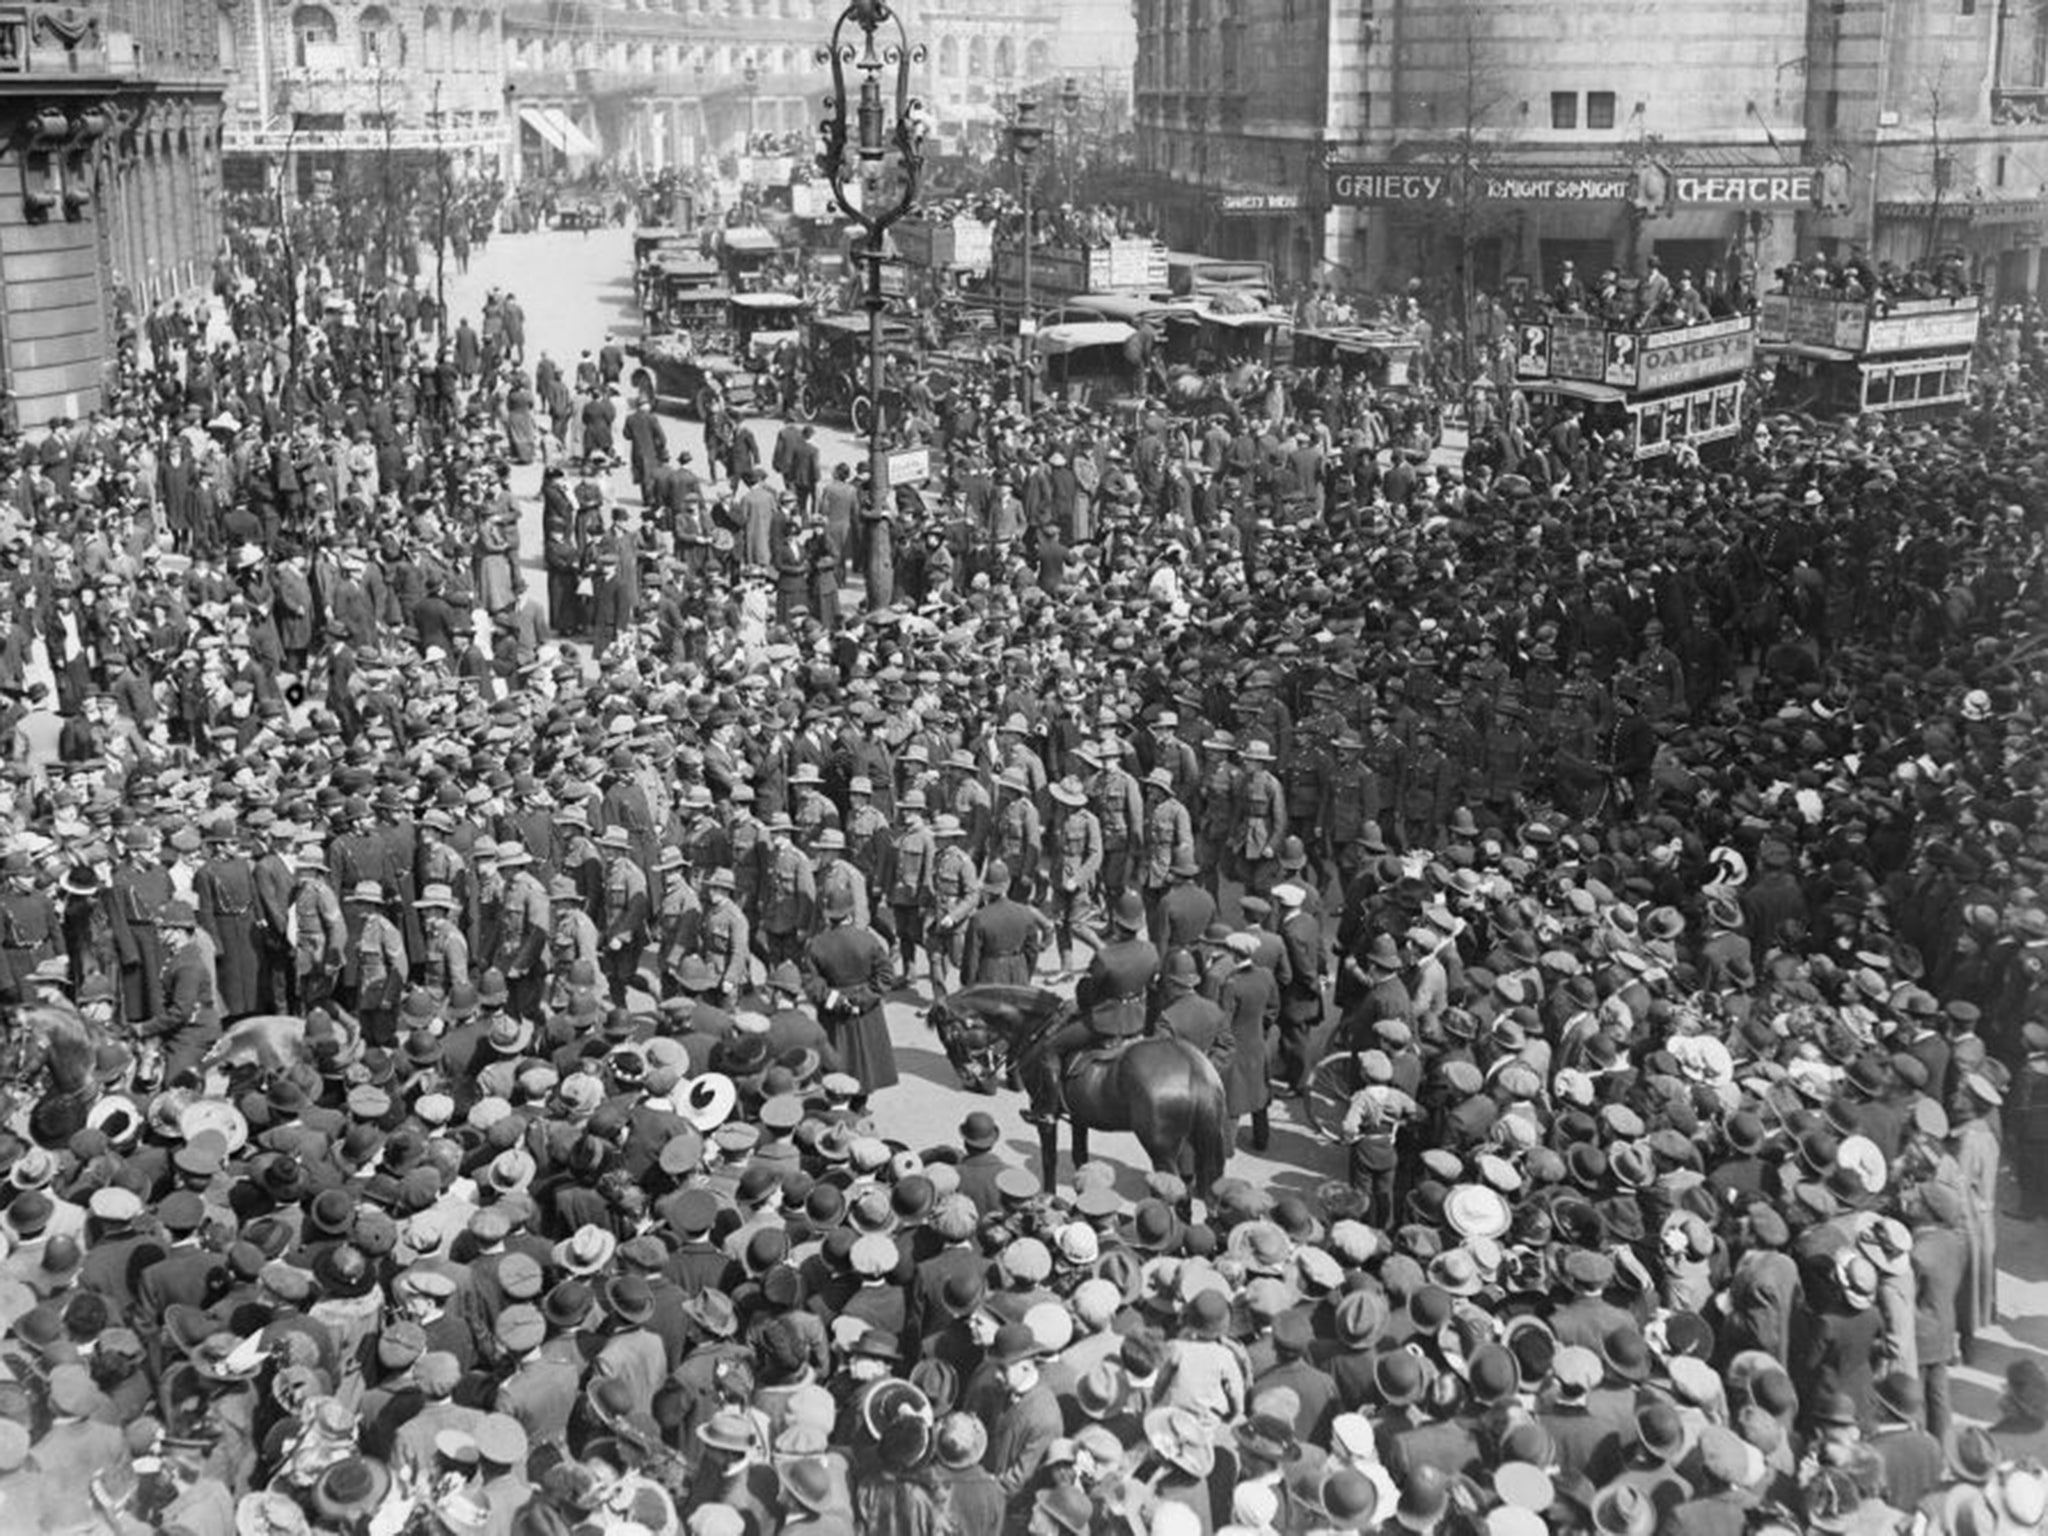 The first Anzac Day was held in 1916 when men of the Australian and New Zealand Army Corps marched through the city to remember their friends